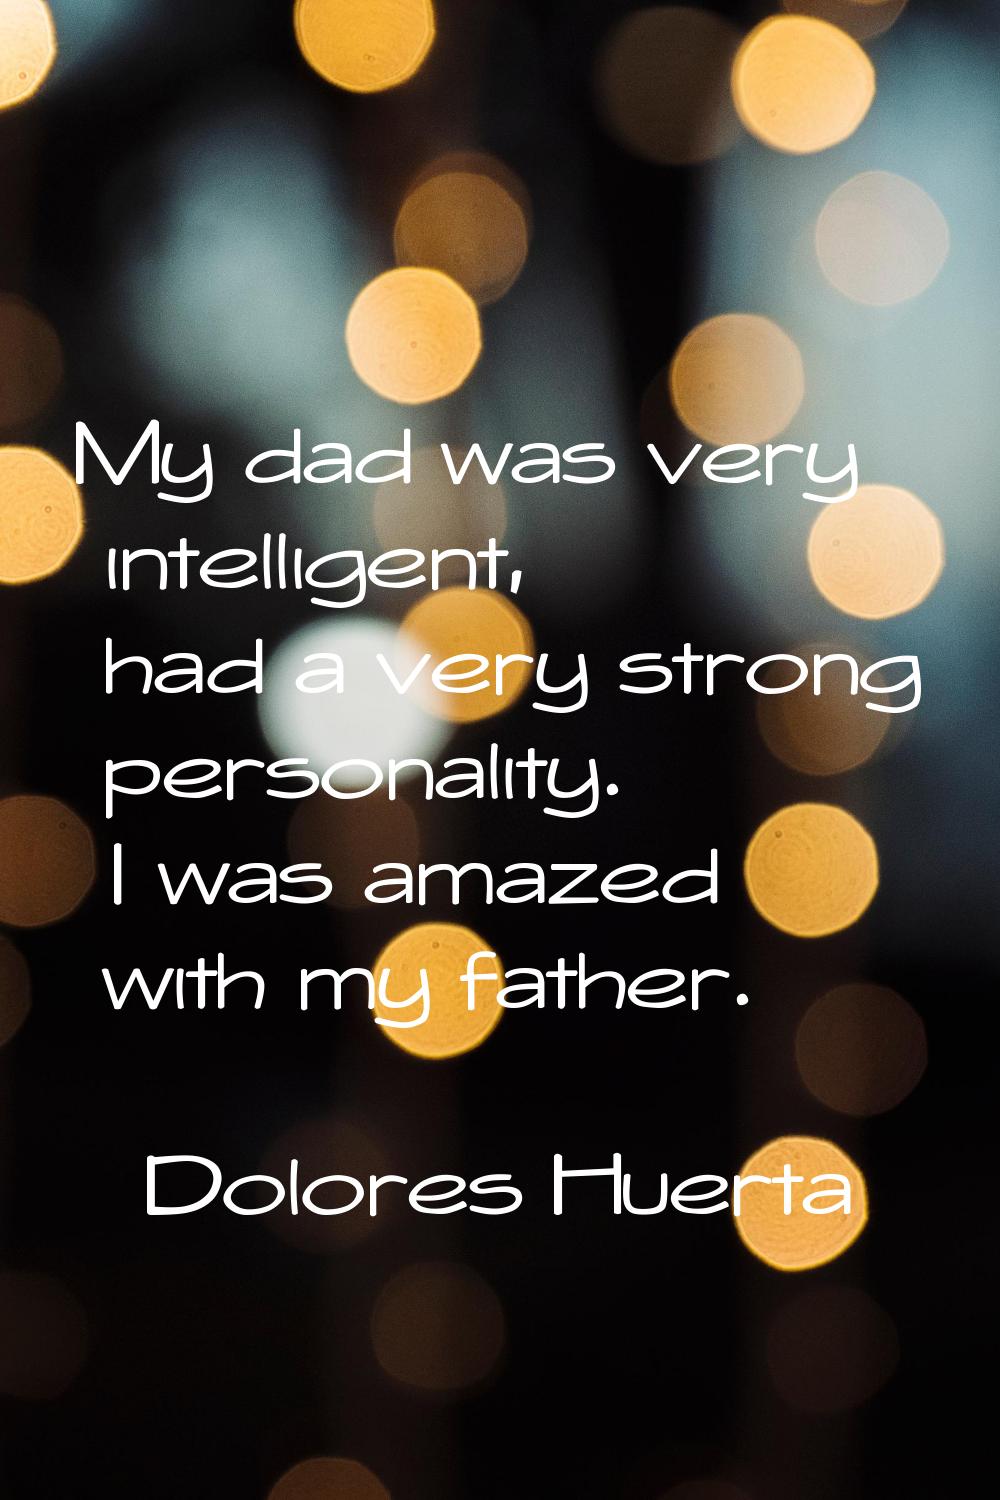 My dad was very intelligent, had a very strong personality. I was amazed with my father.